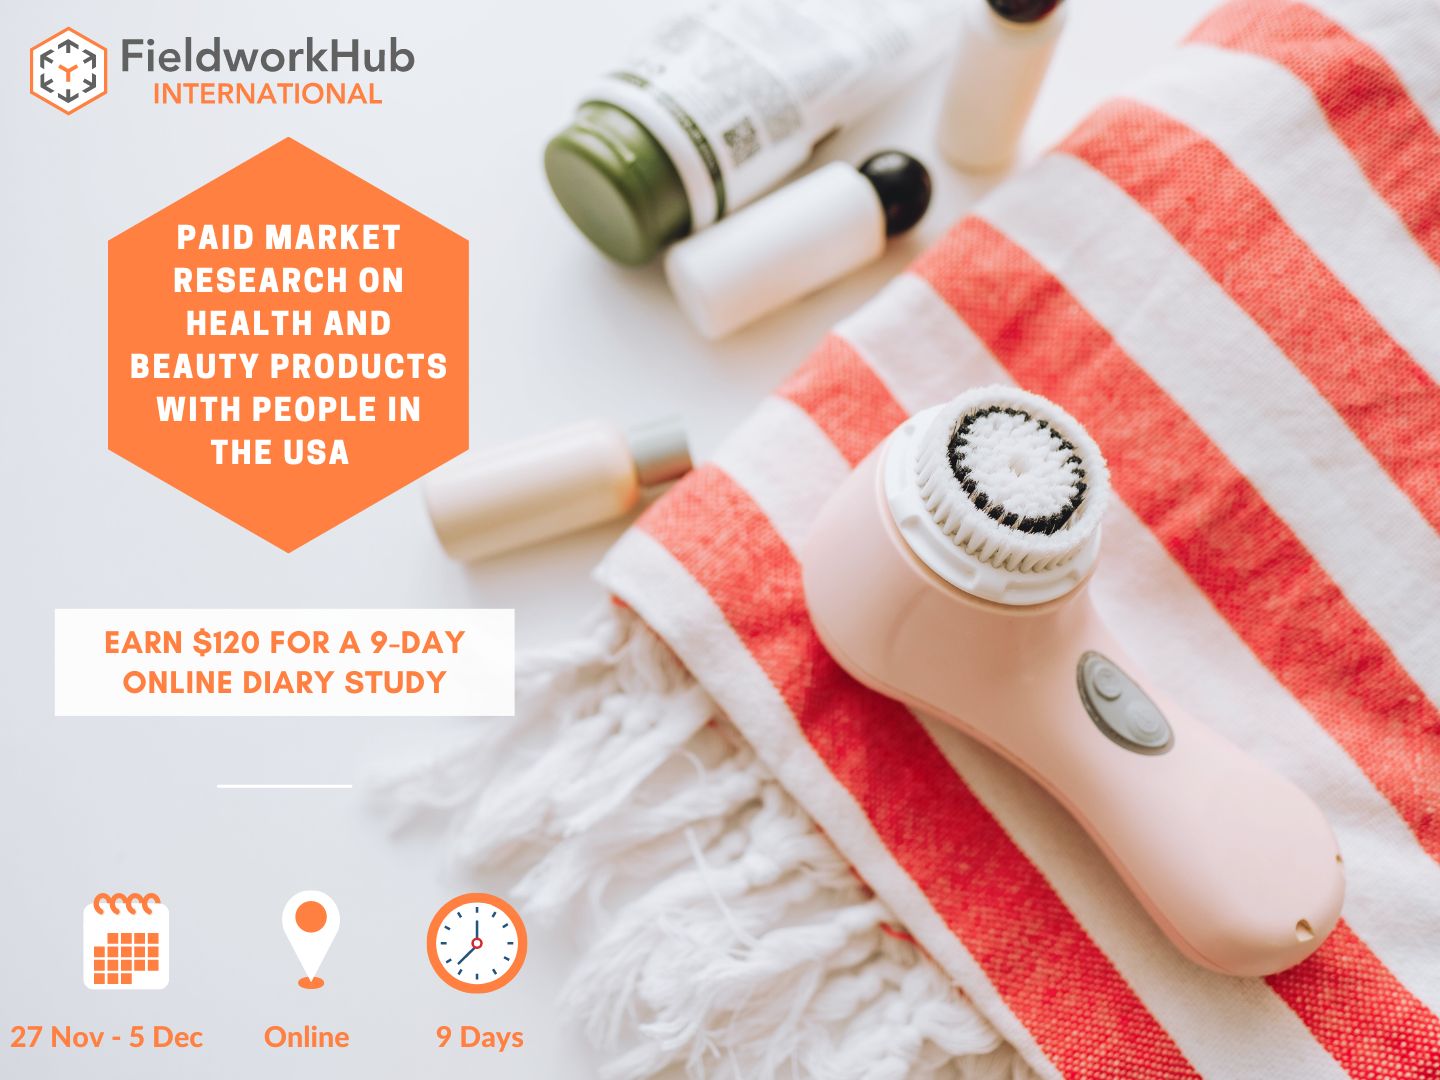 Recruiting people in the USA for an online diary study about health and beauty products - close-up photo of cloth, electric face brush, and various tubes and bottles of beauty lotion